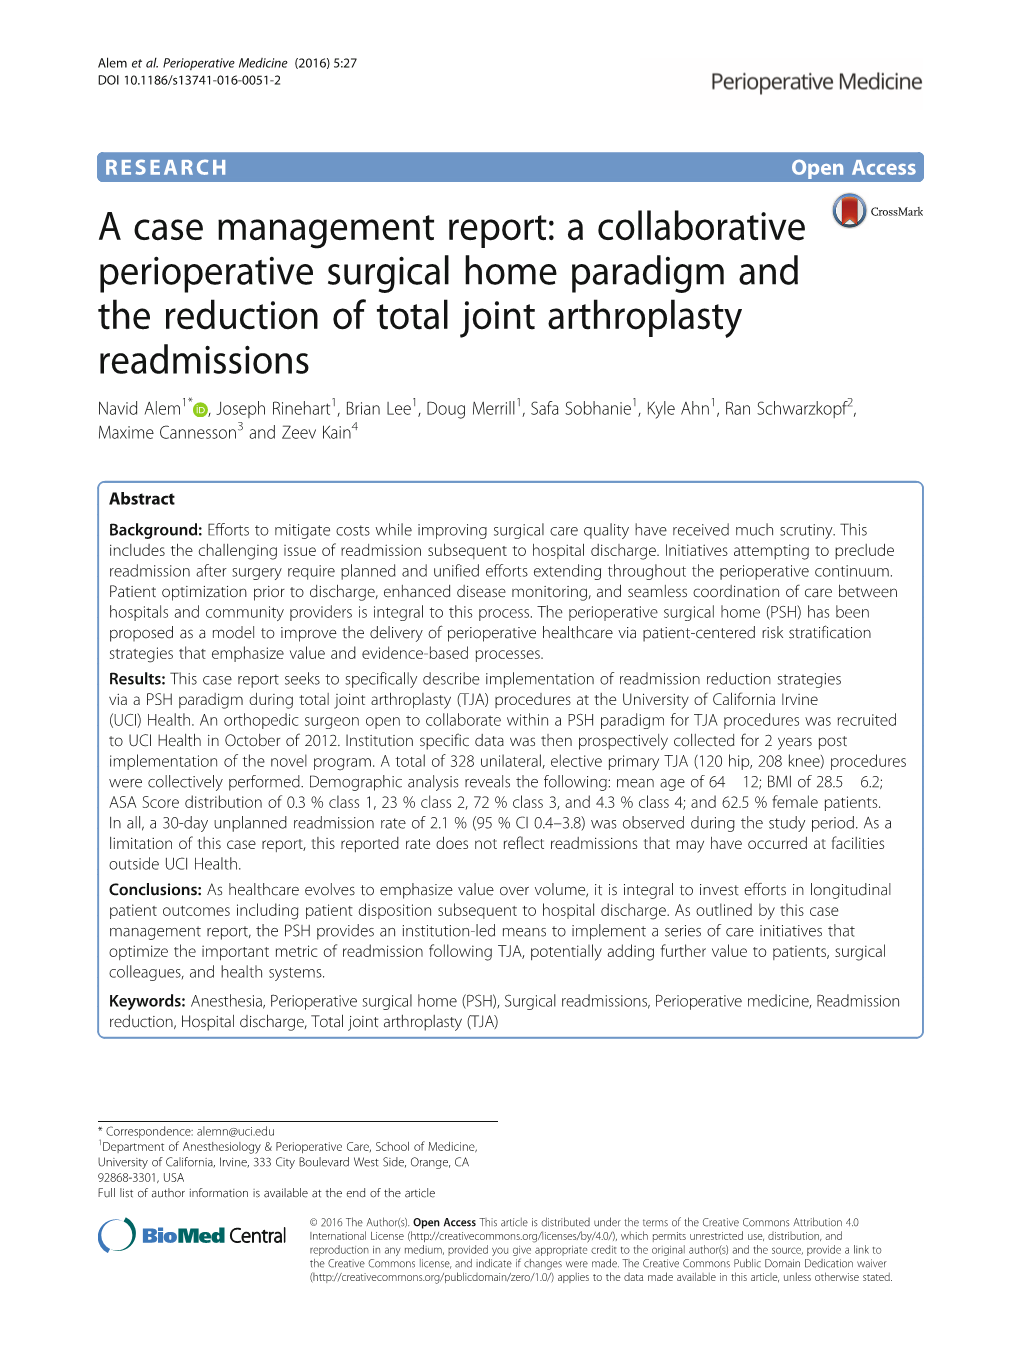 A Collaborative Perioperative Surgical Home Paradigm and the Reduction